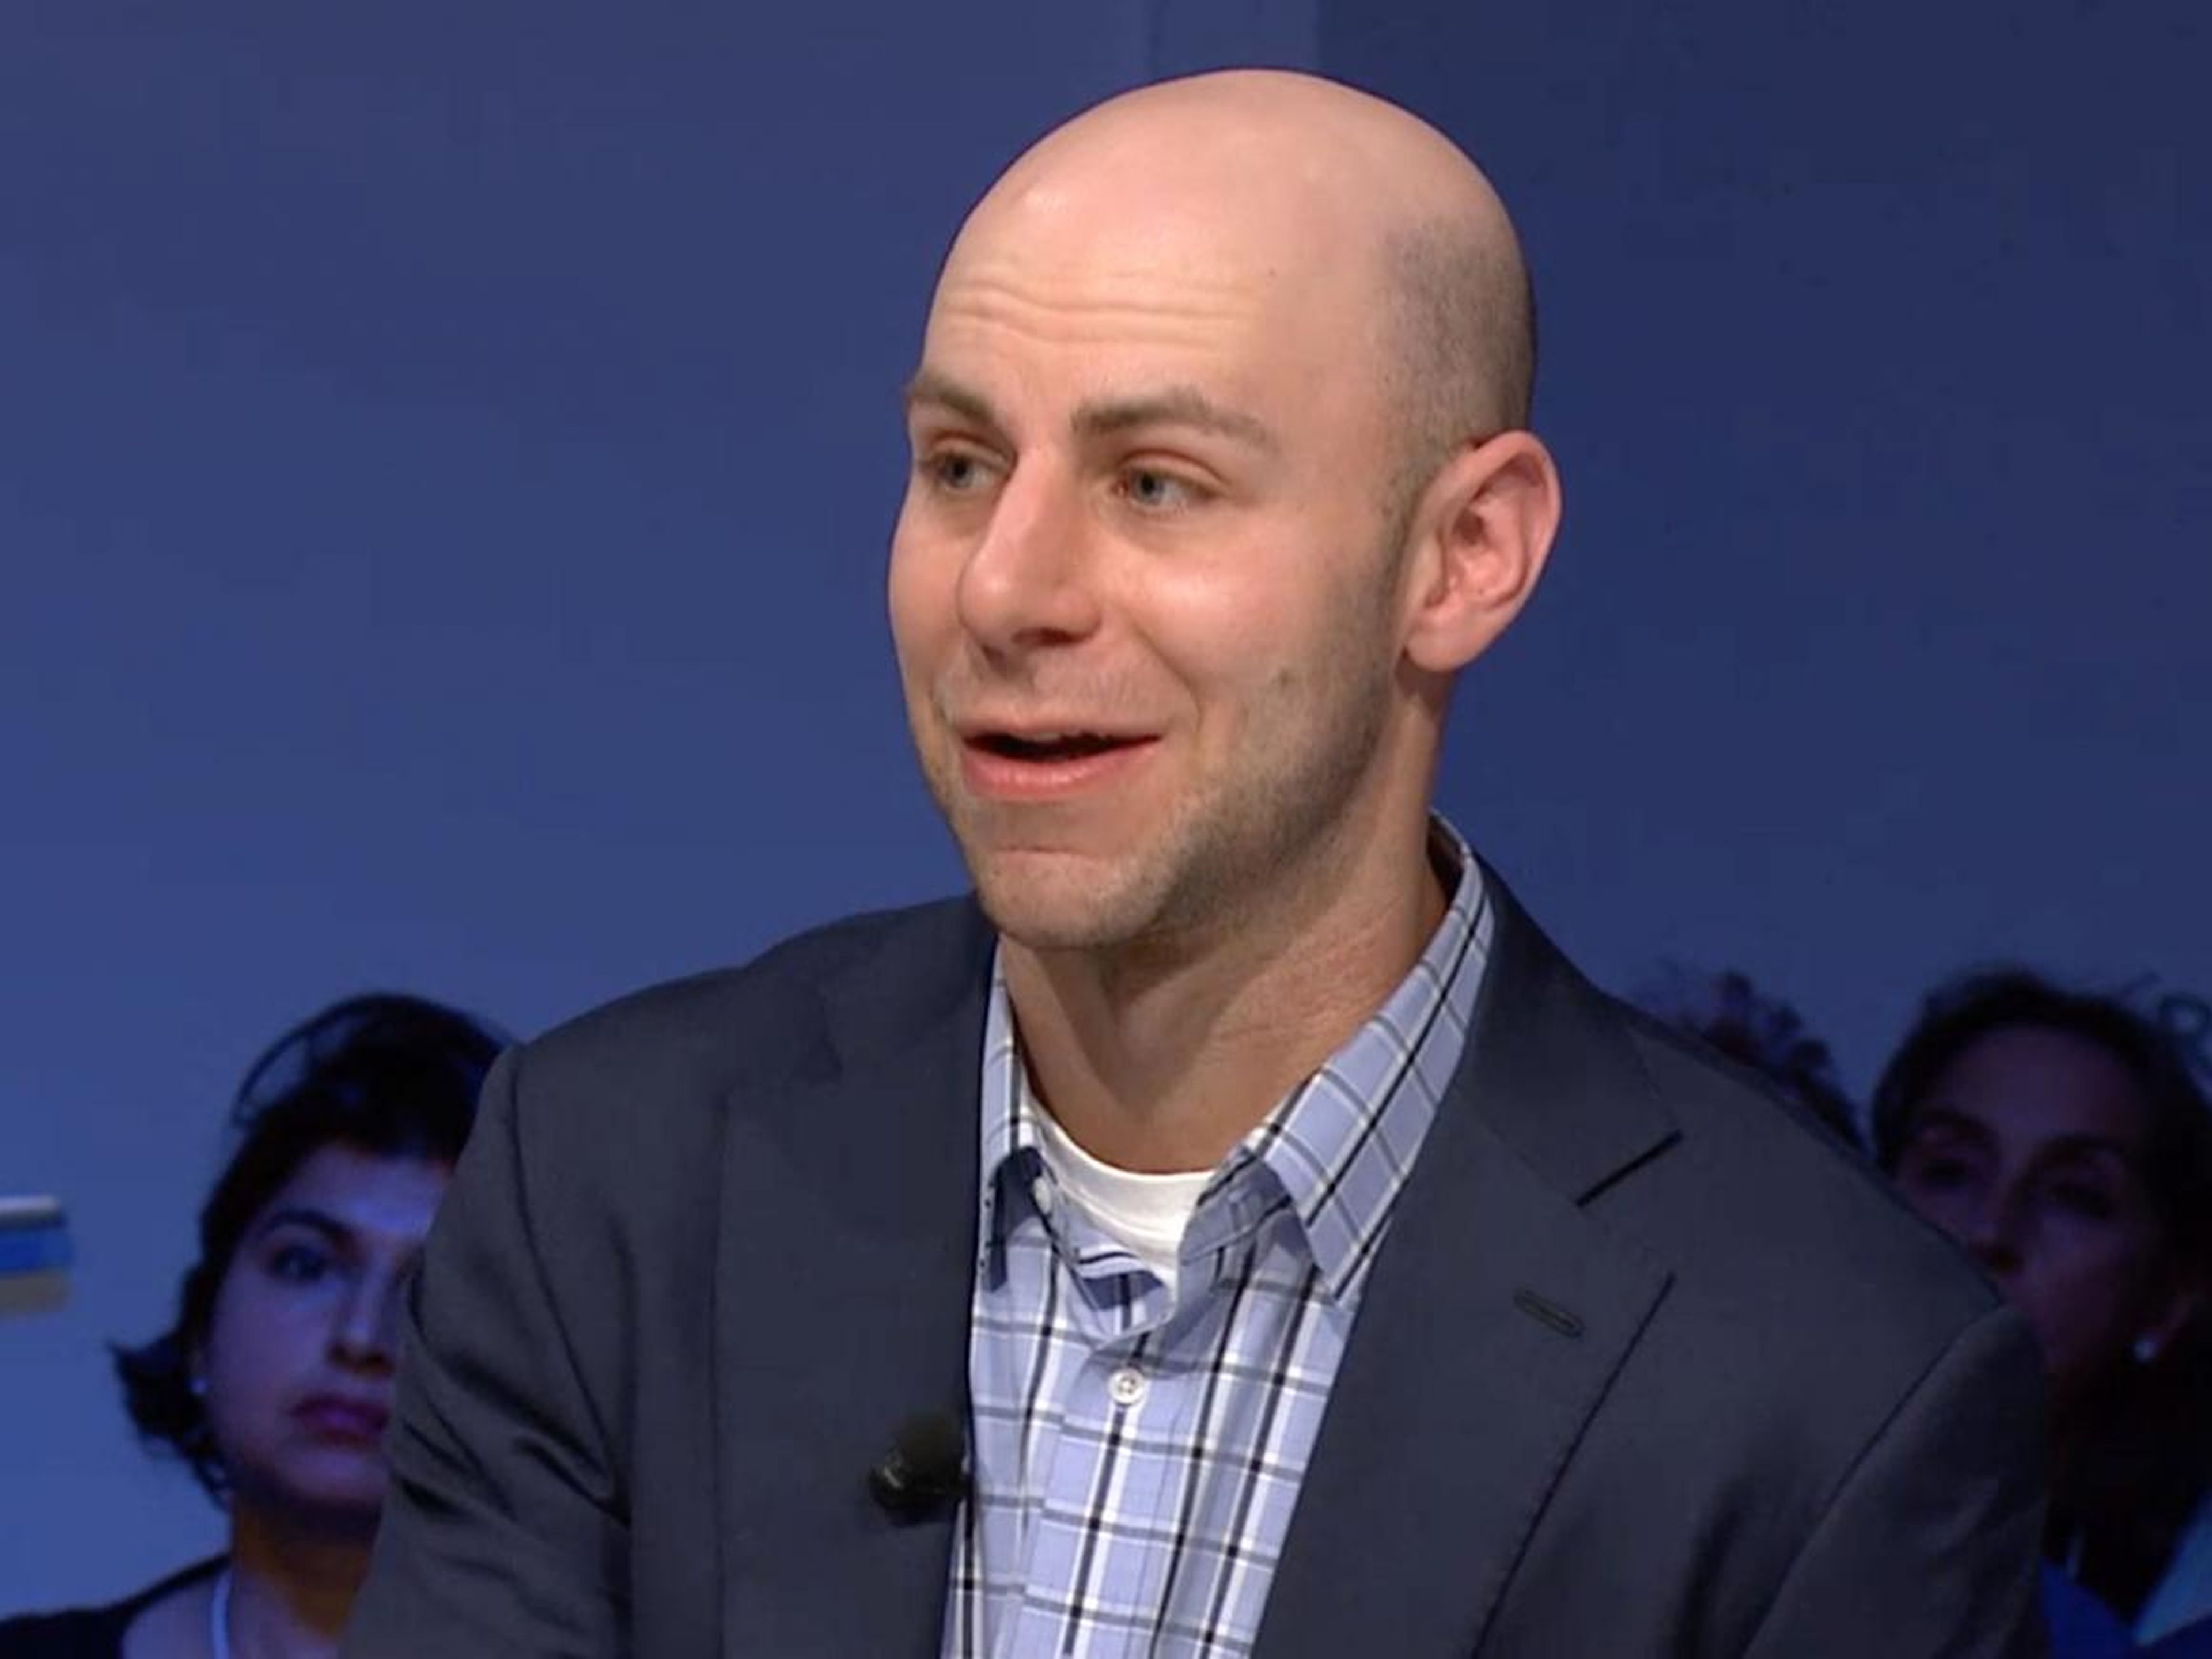 Wharton professor Adam Grant said we should be 'worried but not panicked,' and our response should be taking internal training more seriously.